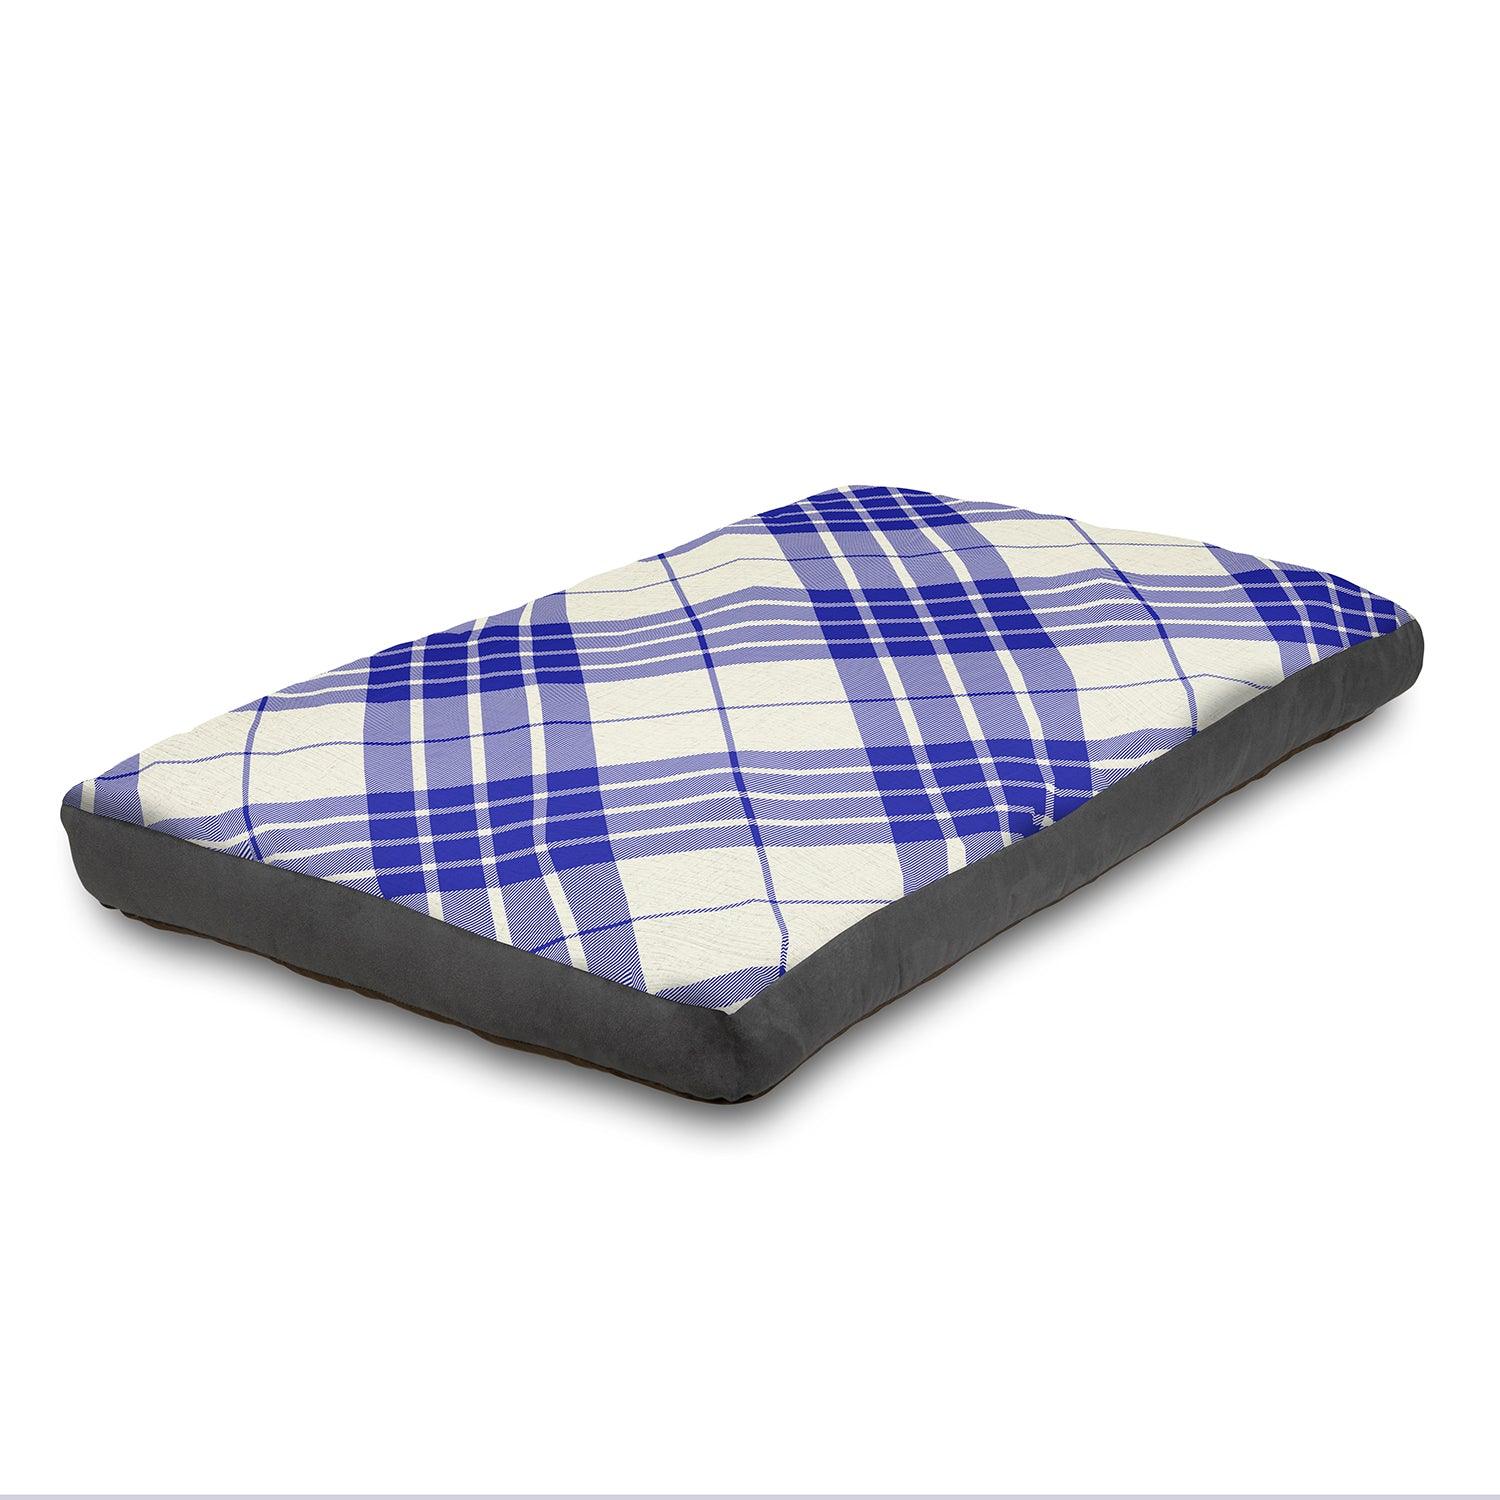 View Super Comfy Dog Bed Soft and Fluffy with Washable Cover Medium 100 cm x 65 cm Blue information